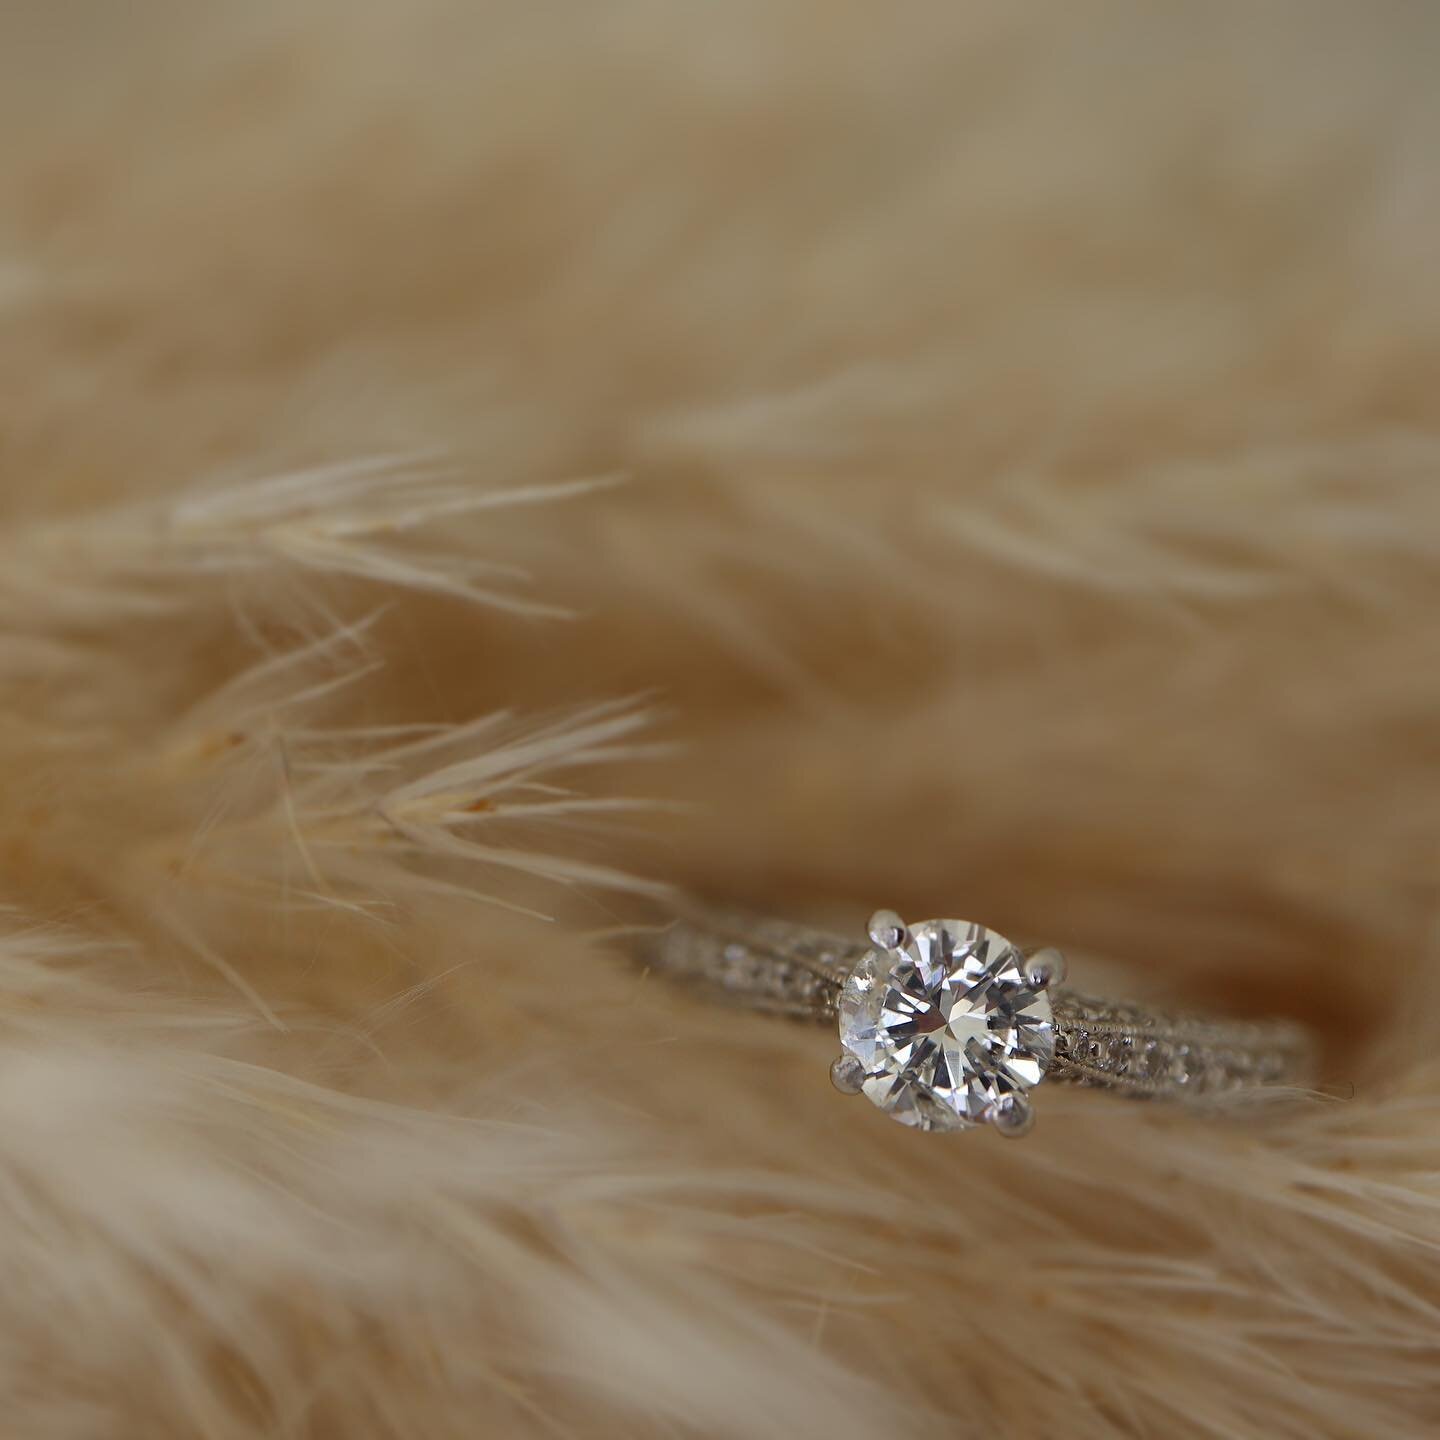 Classic diamond engagement ring with added sparkle to its setting💍✨ 

 #diamond #diamonds #diamondrings #rings #ringsofinstagram #gold #jewels #jewlery #diamondengagementring #diamondengagementrings #engagementring #engaged #engagement #style #ringc